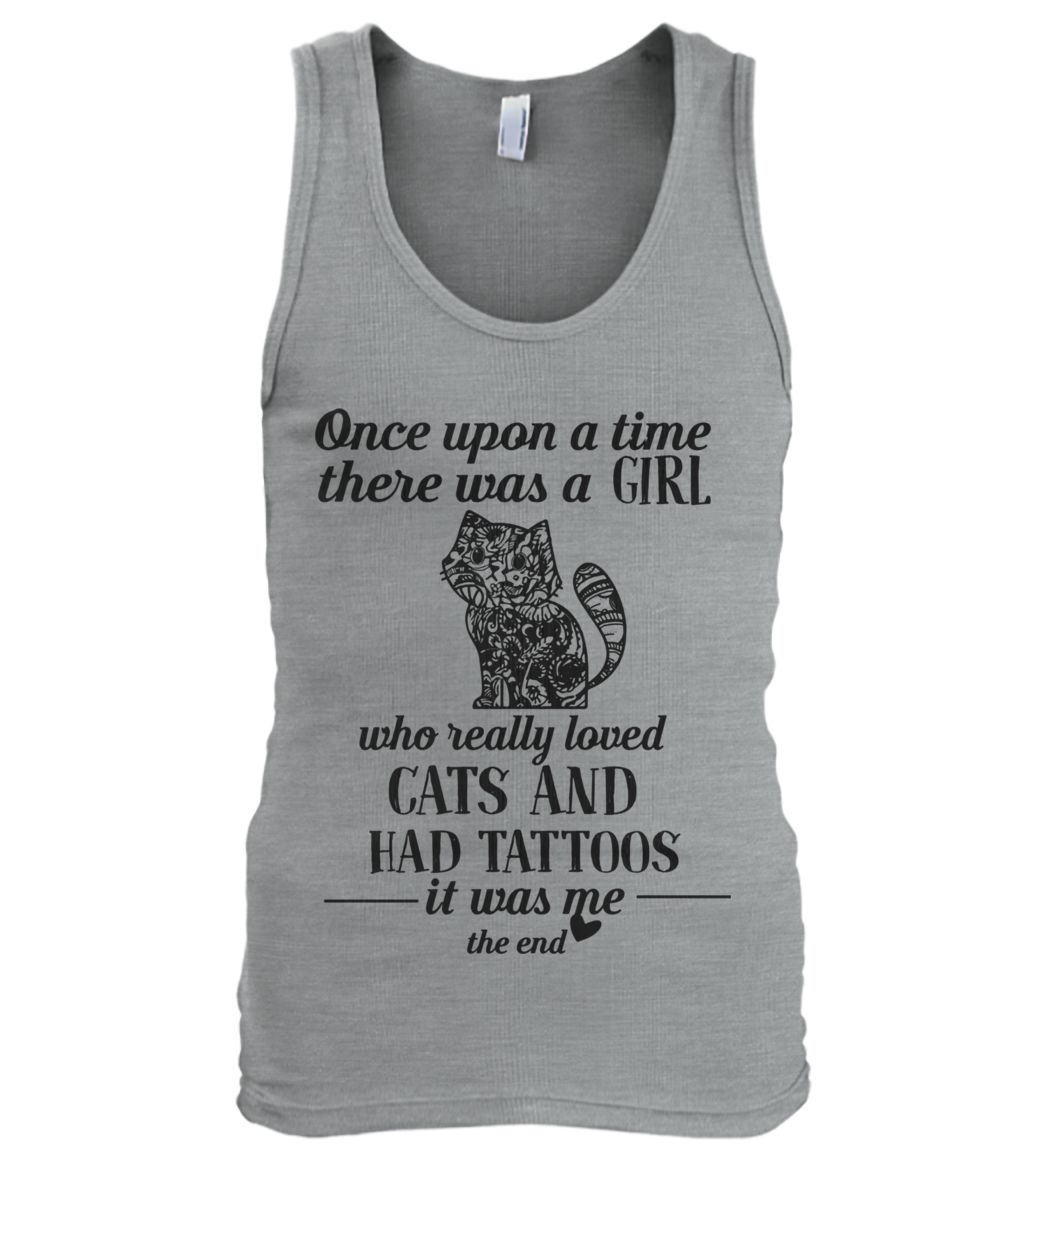 Once upon a time there was a girl who really loved cats and had tattoos it was me men's tank top